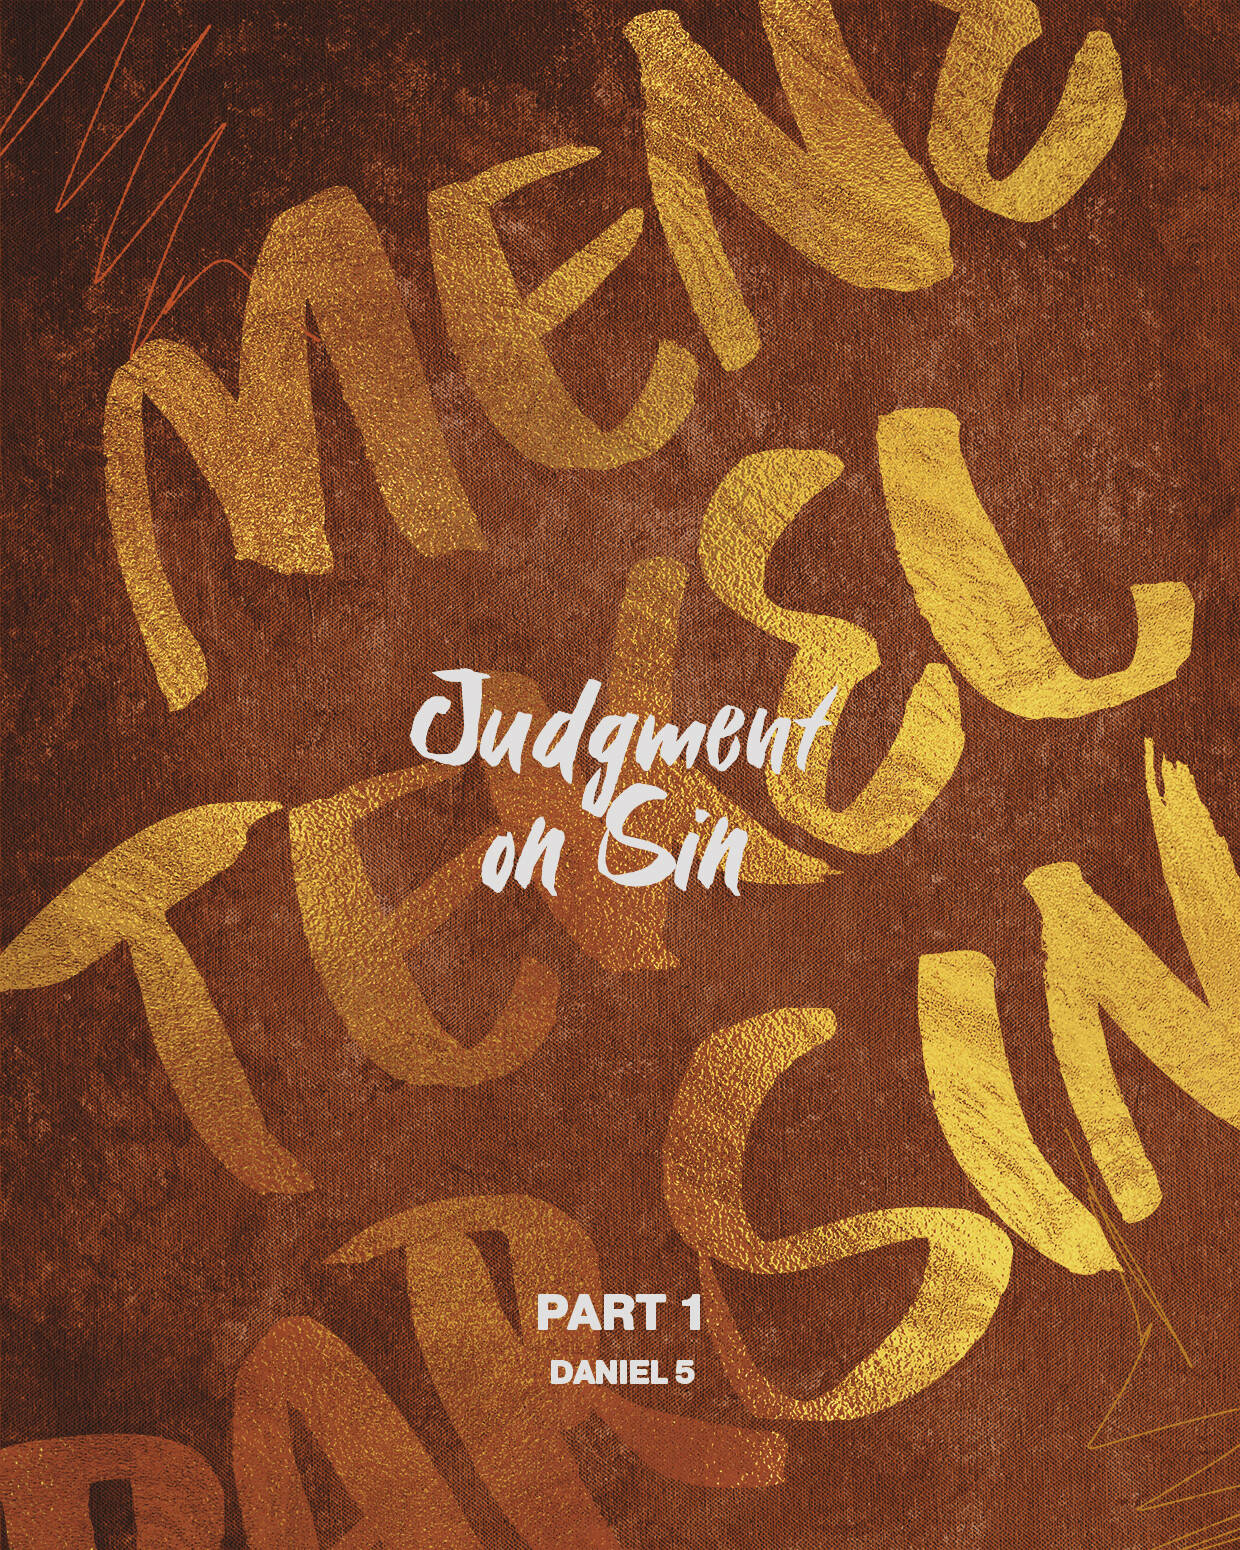 Judgment on Sin | Part 1